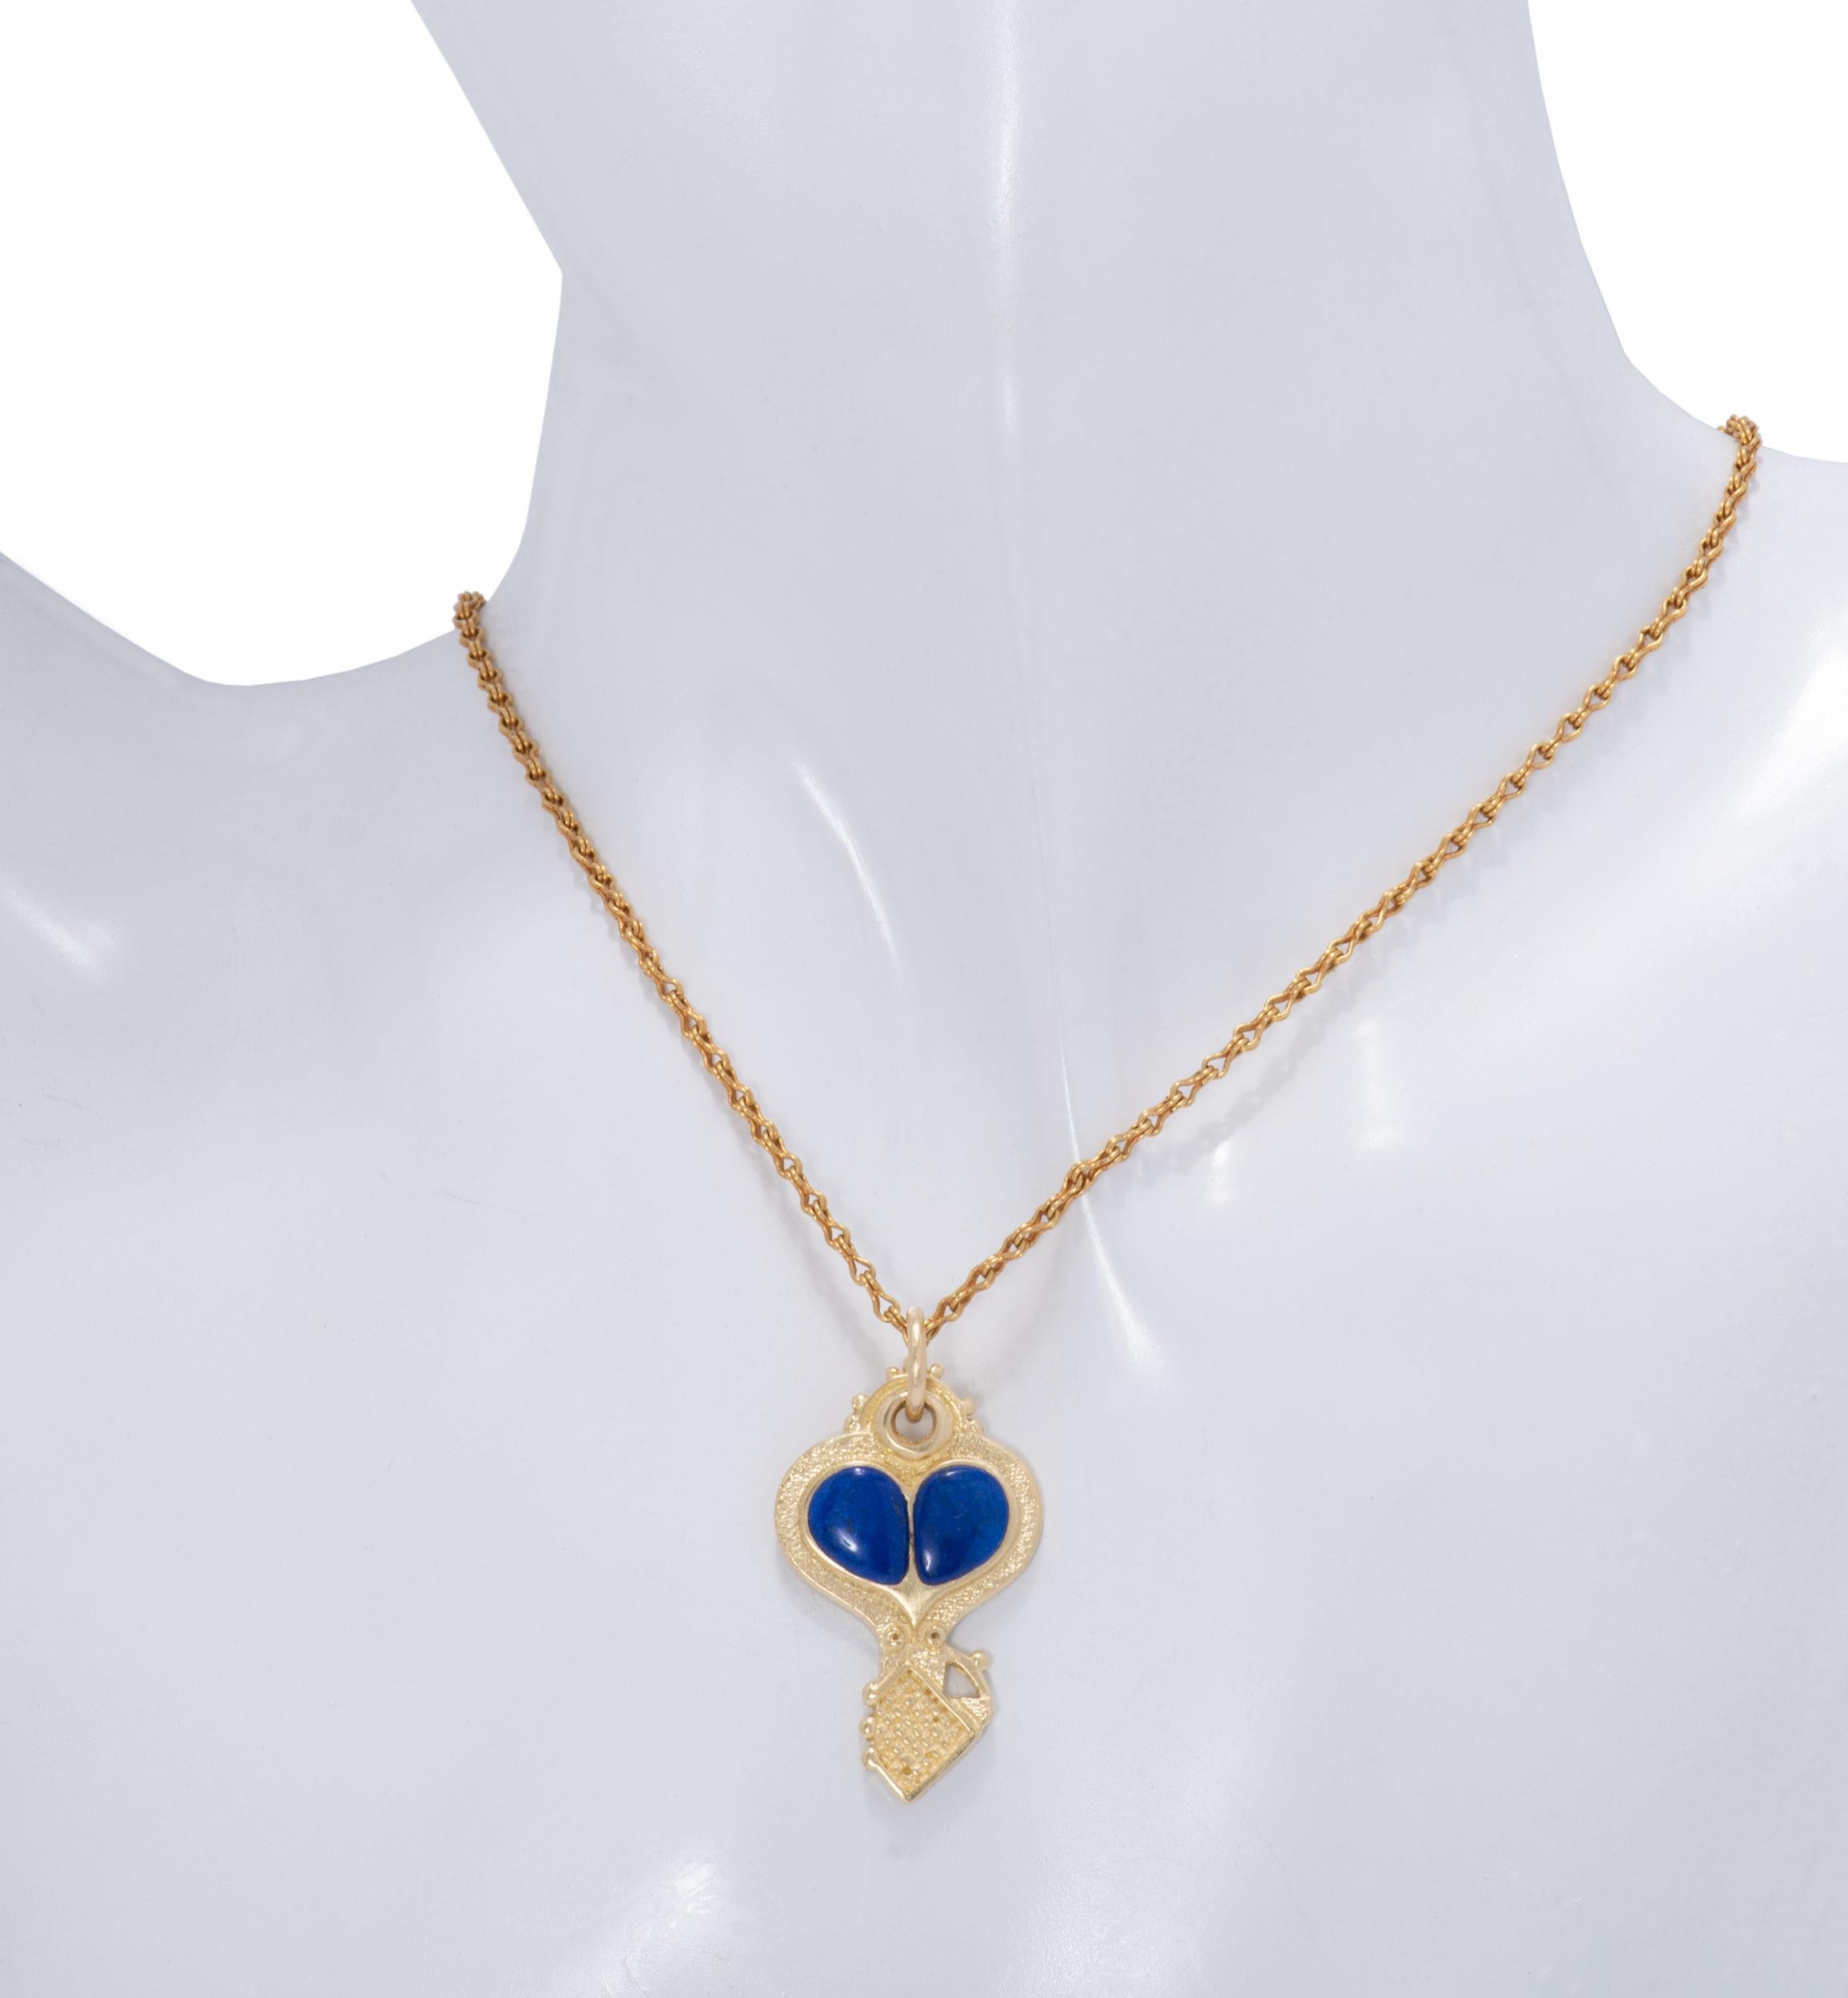 18 Karat Gold Key and Heart Pendant with Lapis In New Condition For Sale In Santa Fe, NM